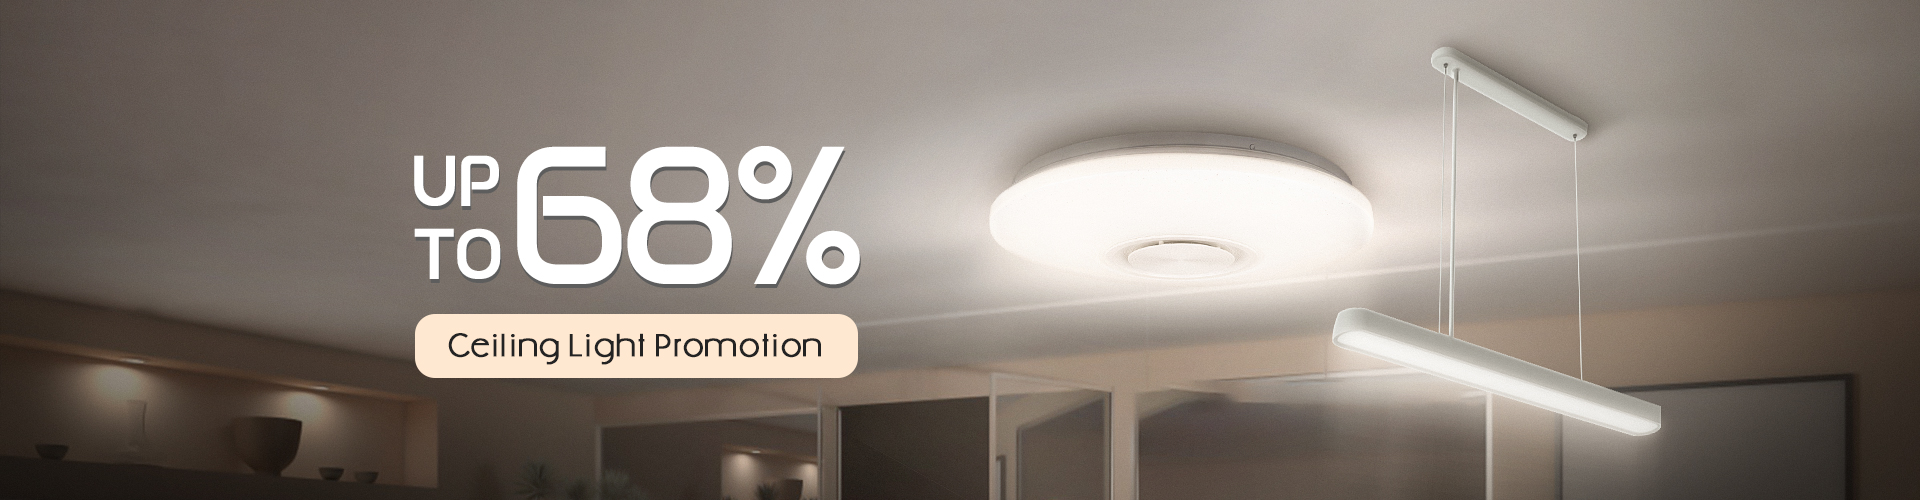 UP TO 68% OFF for Ceiling Light Promotion